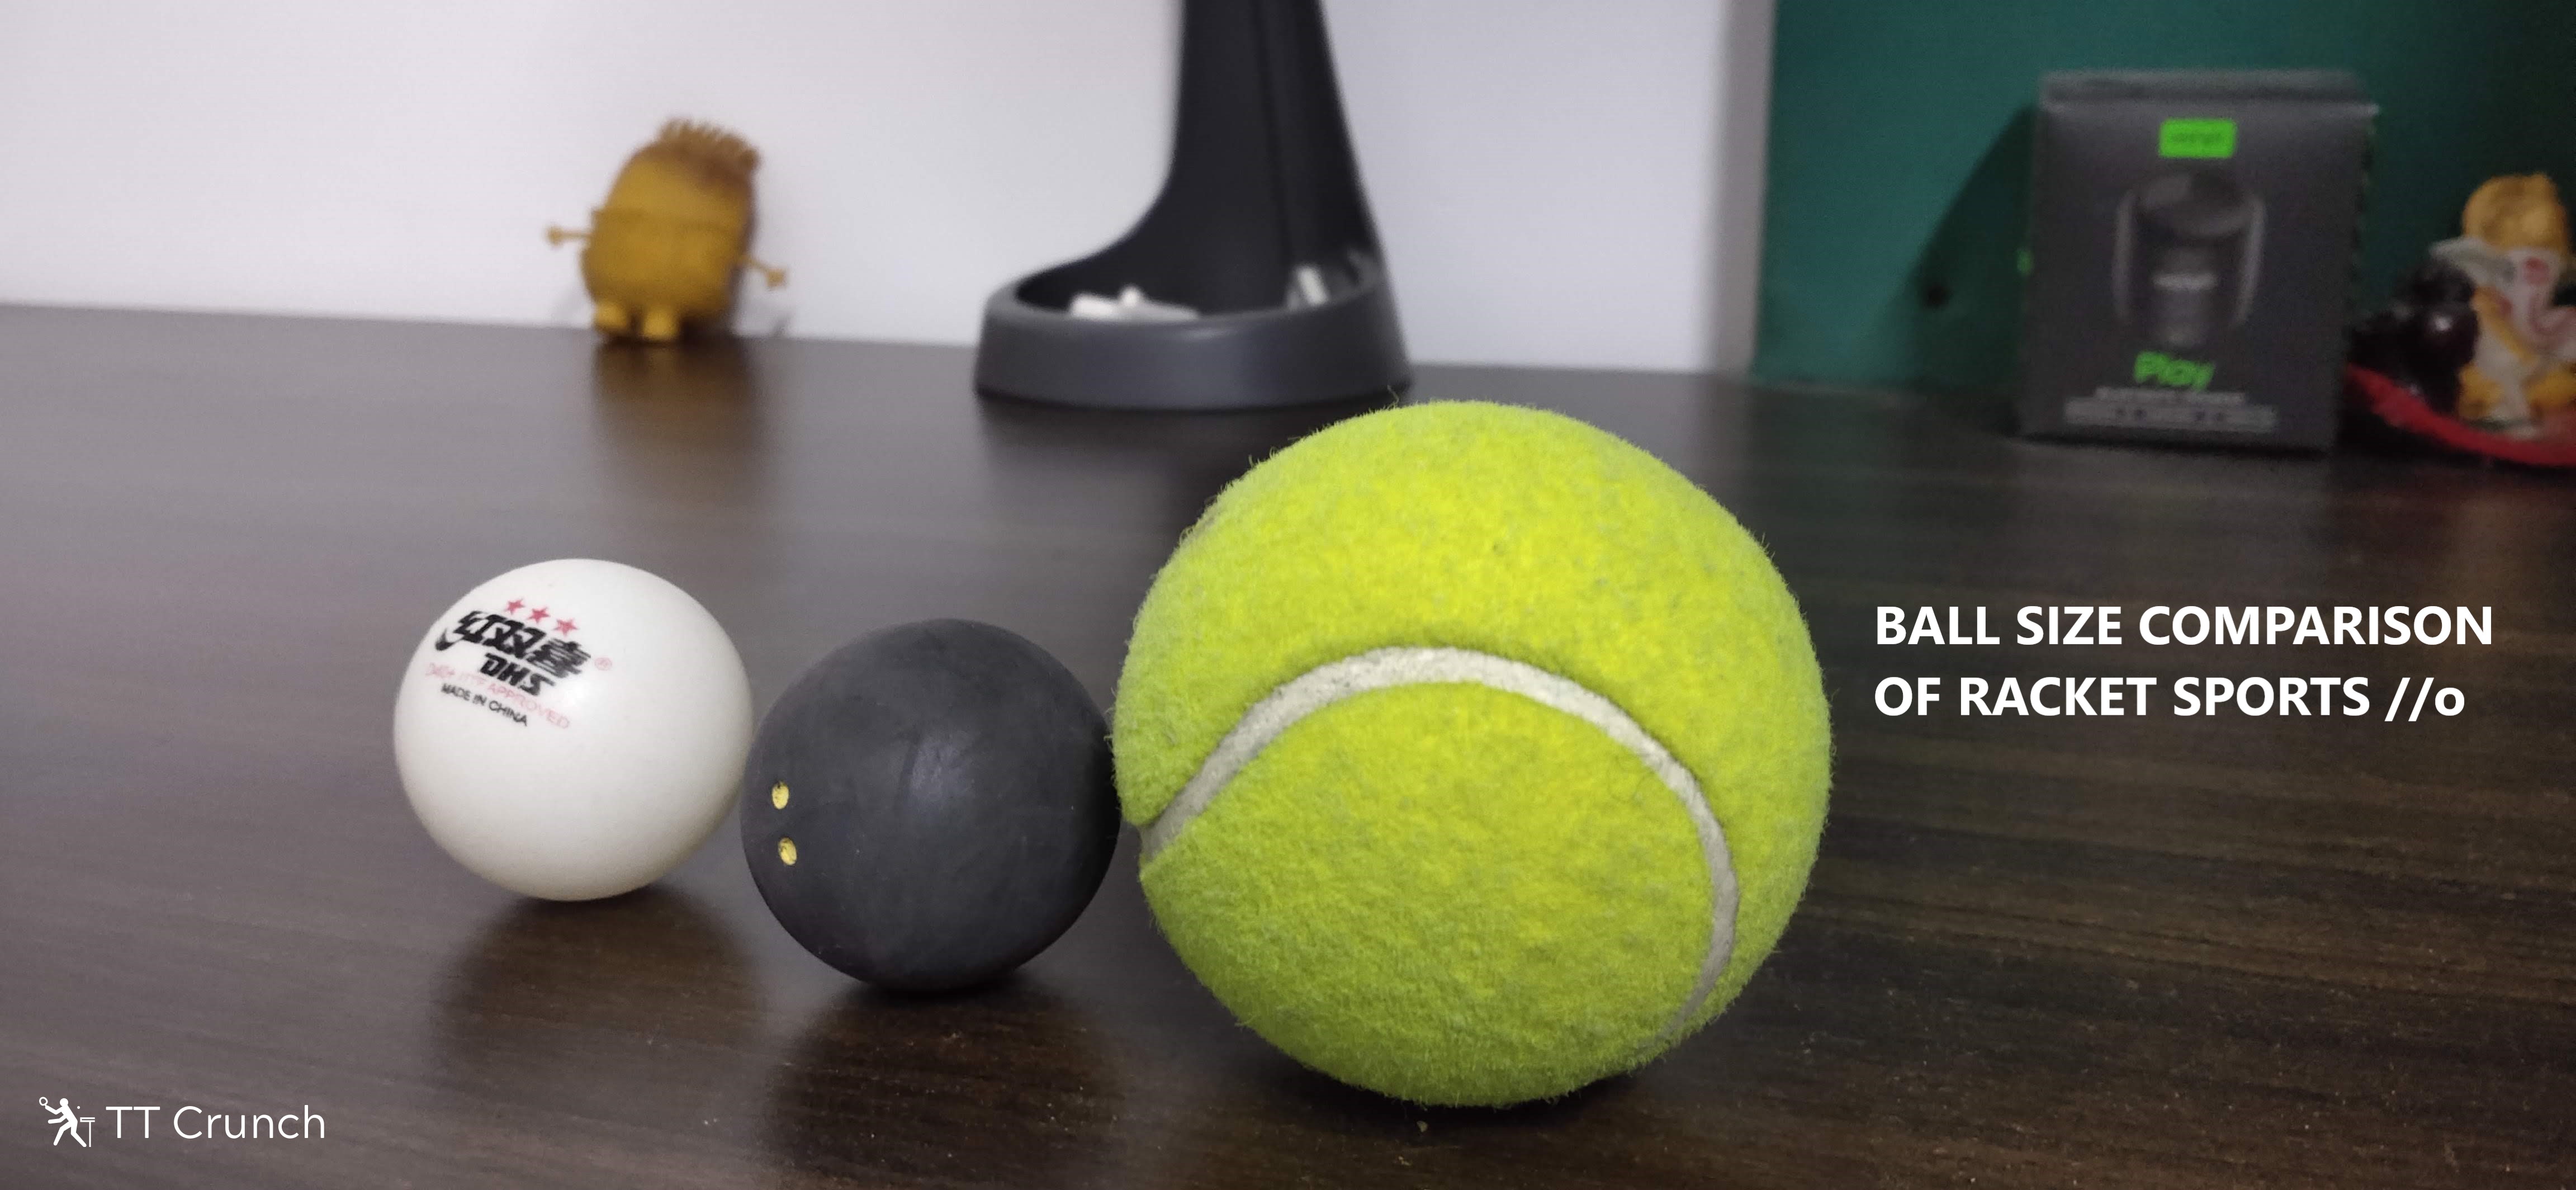 pollo Exquisito dulce Ball Weight and Size Comparison of Different Racket Sports - TT Crunch